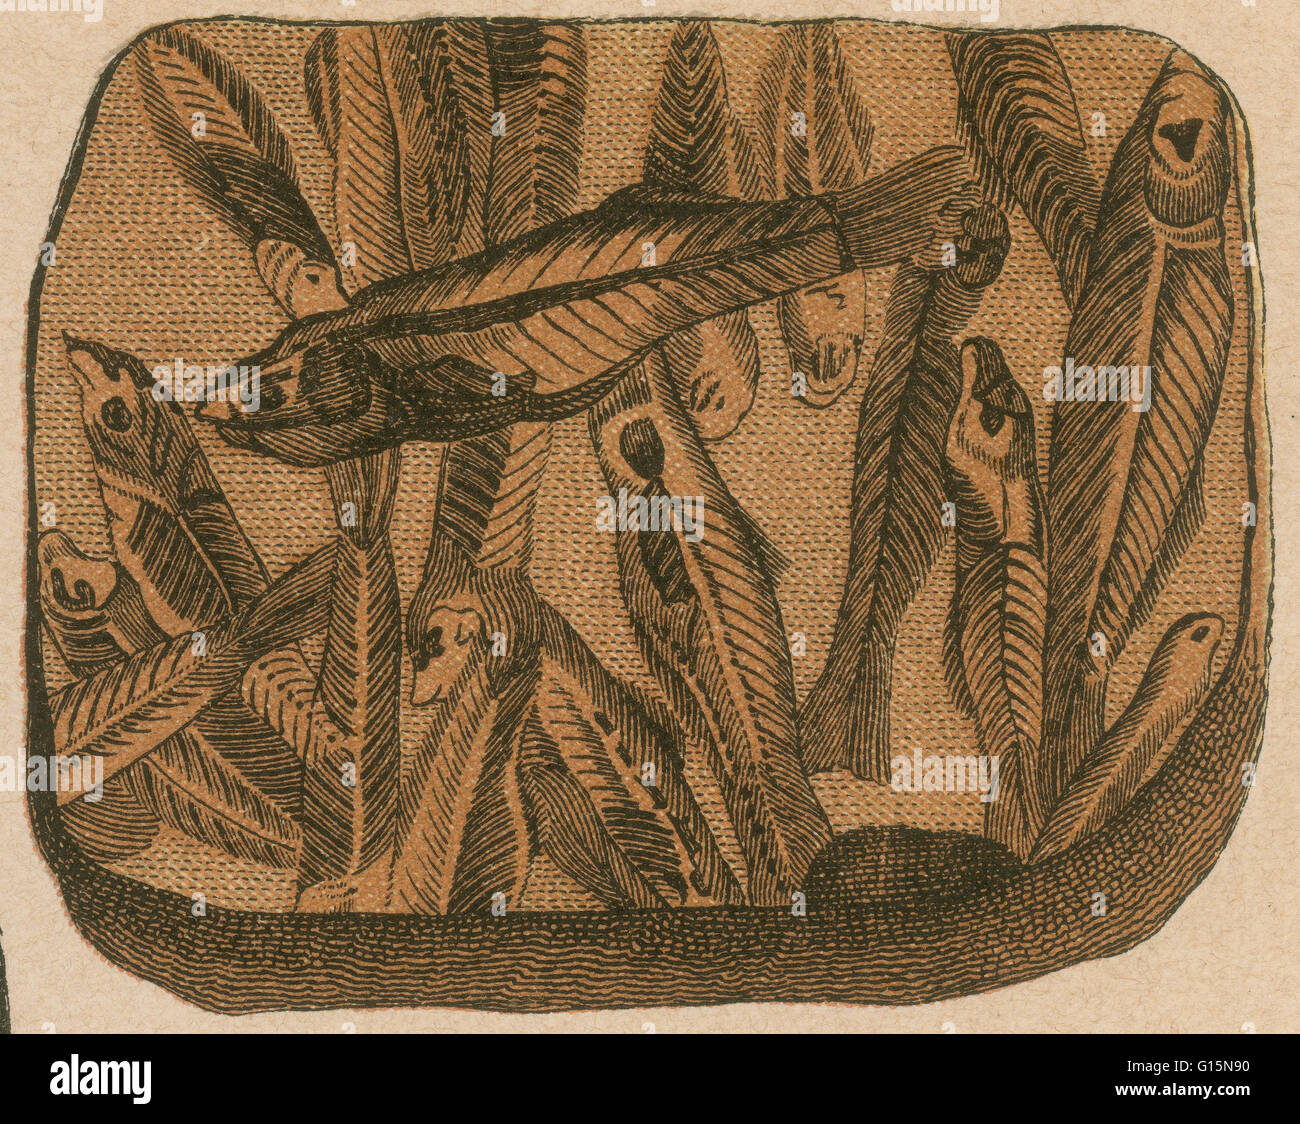 Prehistoric fish, Lebias cephalotes. Lithograph print from a rare work by G.H.Schubert entitled, Illustrated Geology and Paleontology, 1886. This series was published from 1896 and is a great work on dinosaur fossils. Stock Photo